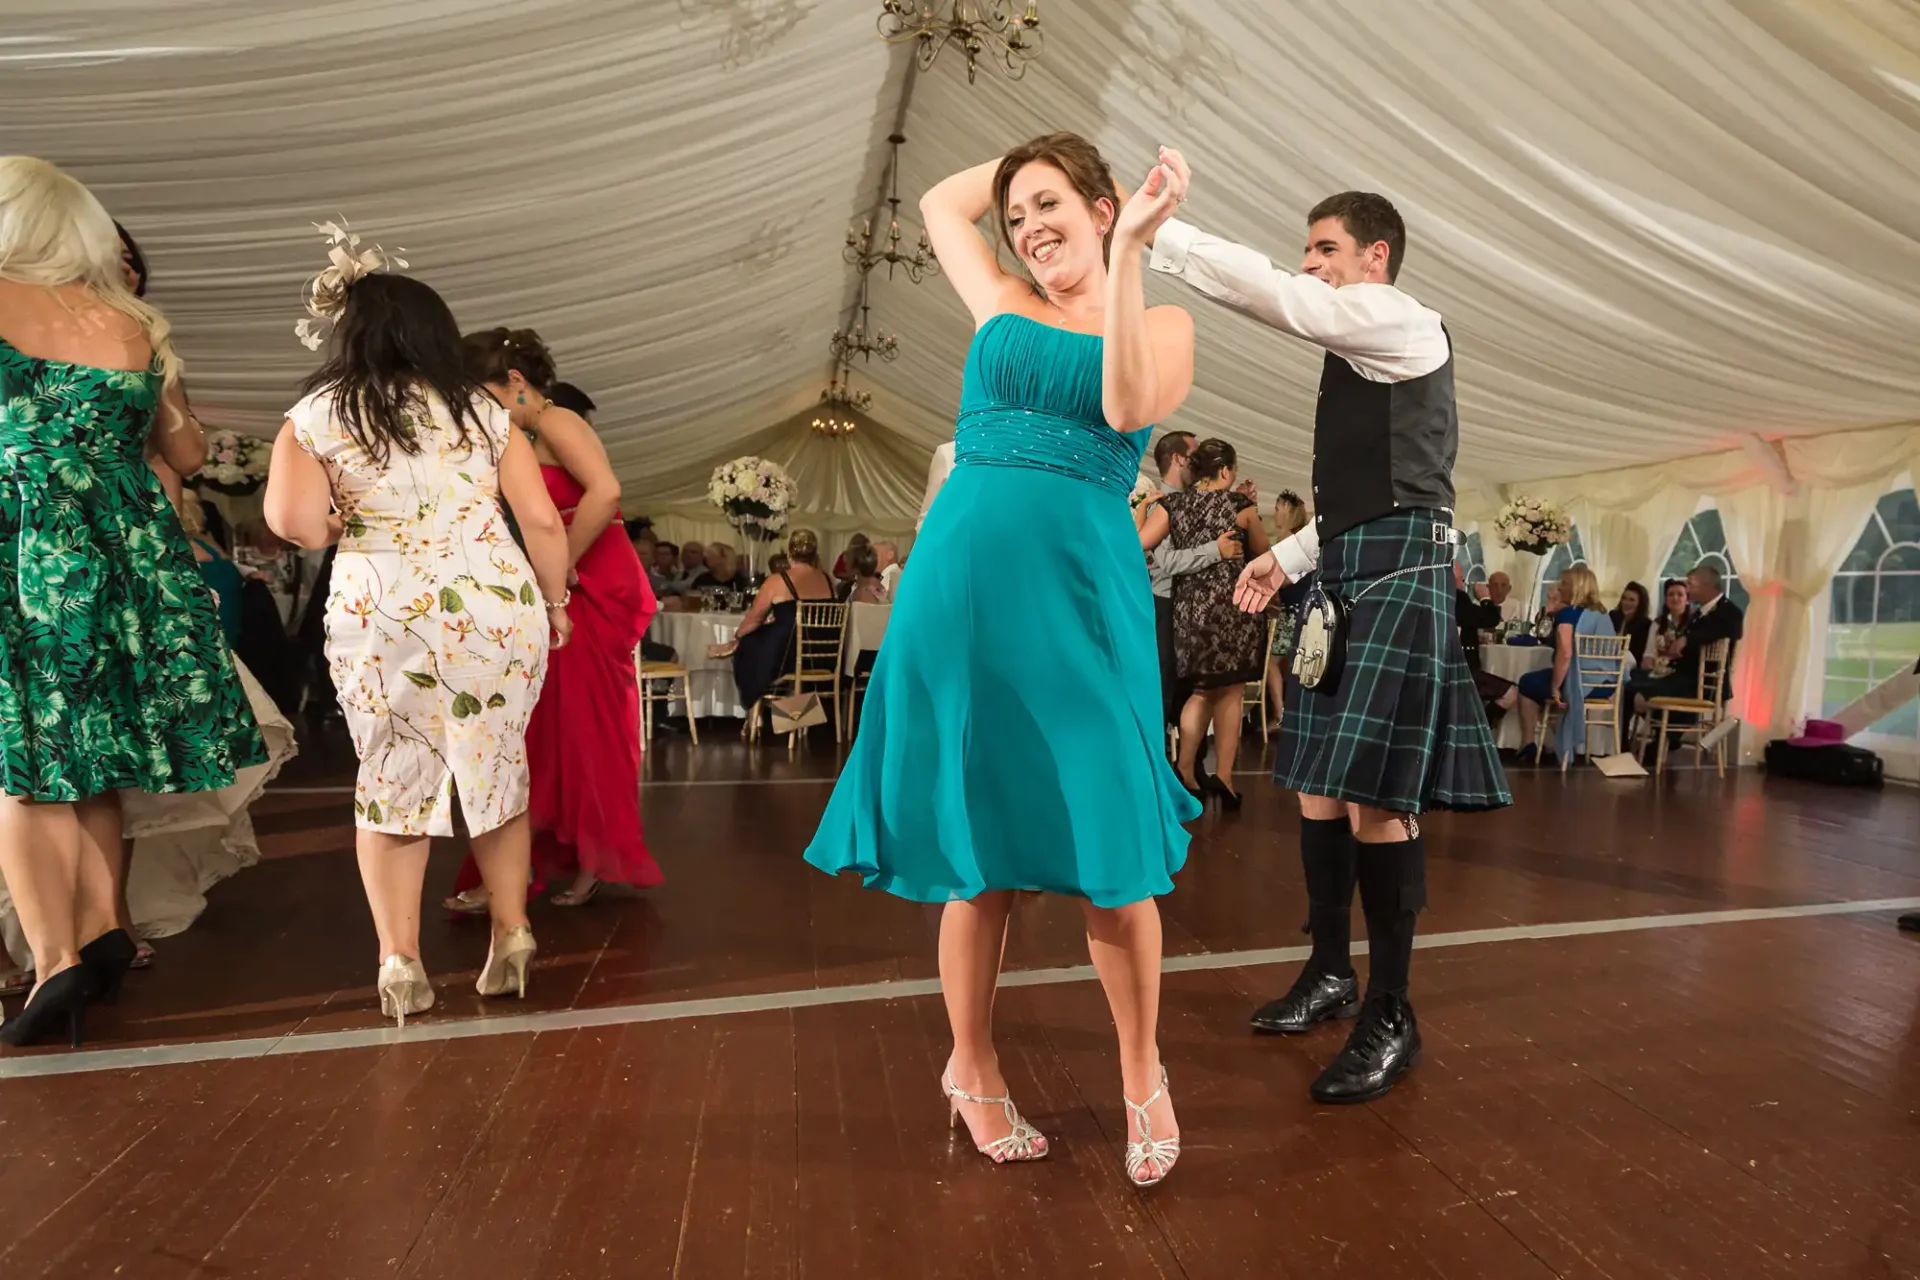 A woman in a turquoise dress dances joyfully with raised arms, and a man in a kilt dances behind her in a tent at a lively event.